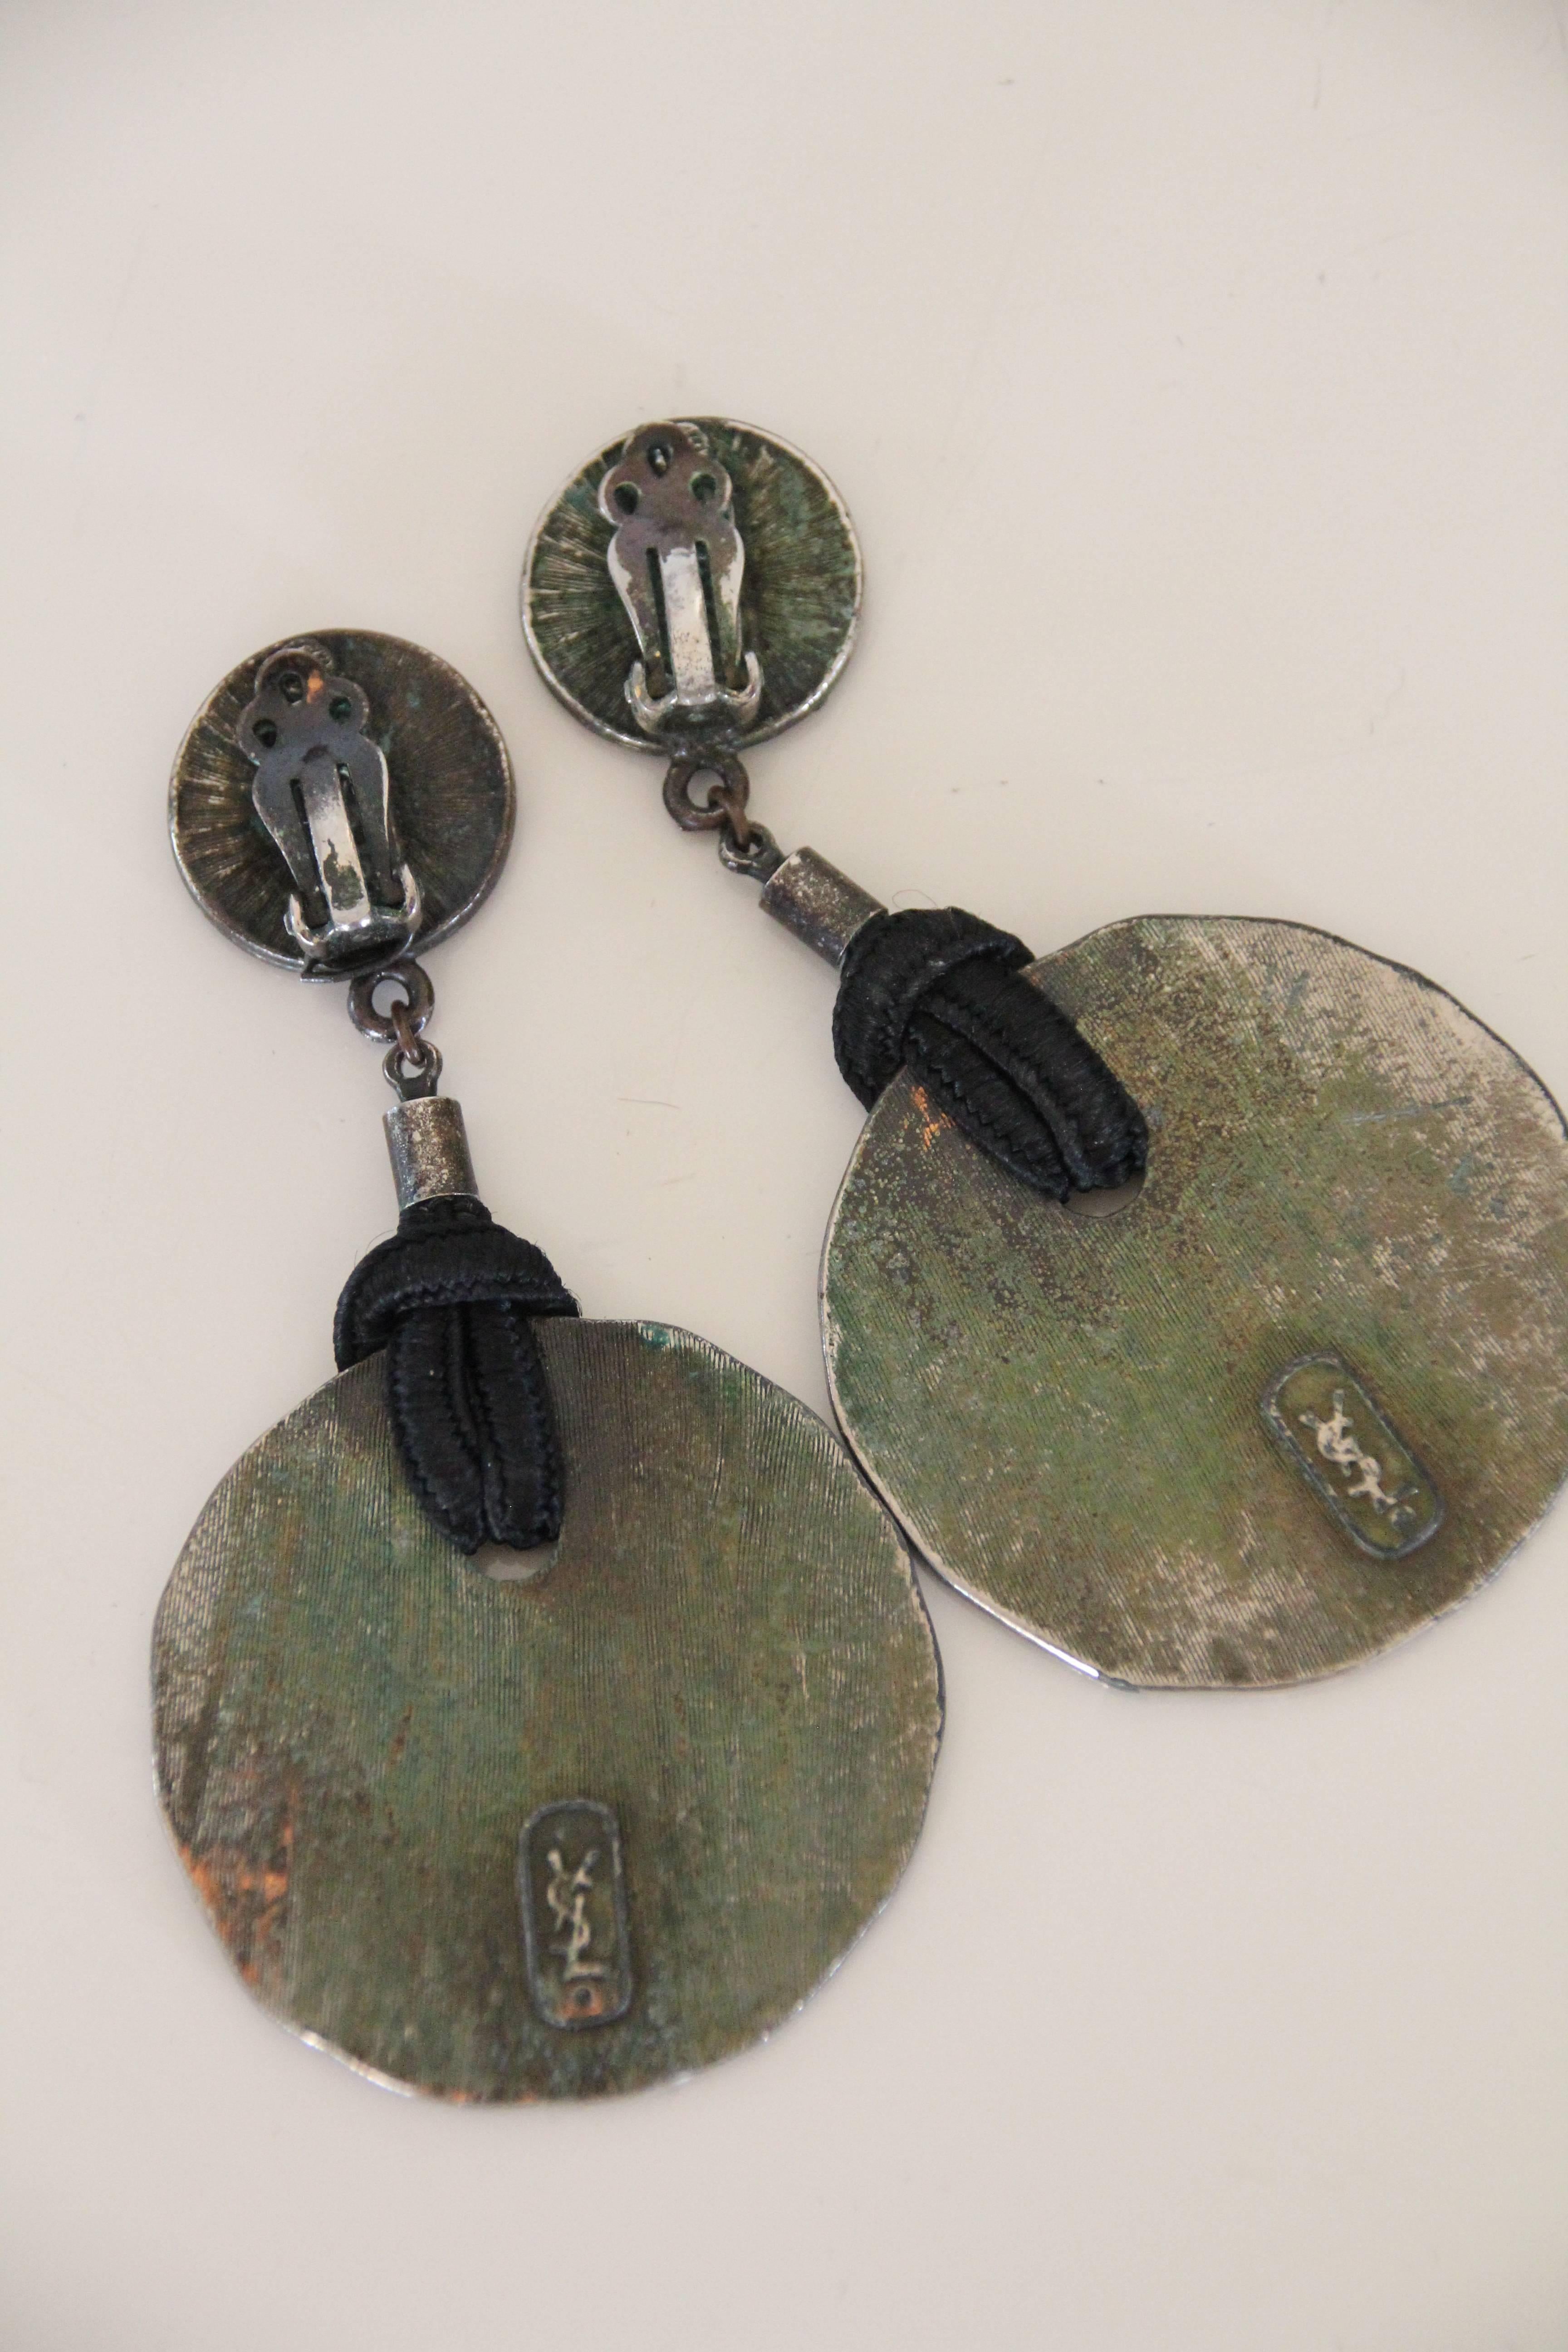 A great casual jewelry set of earrings and a bolo tie: 1980s Yves Saint Laurent. Hammered bronze disc bolo tie with black cord and end caps. Matching hammered disc and leather dangle earrings with clip-on back. 